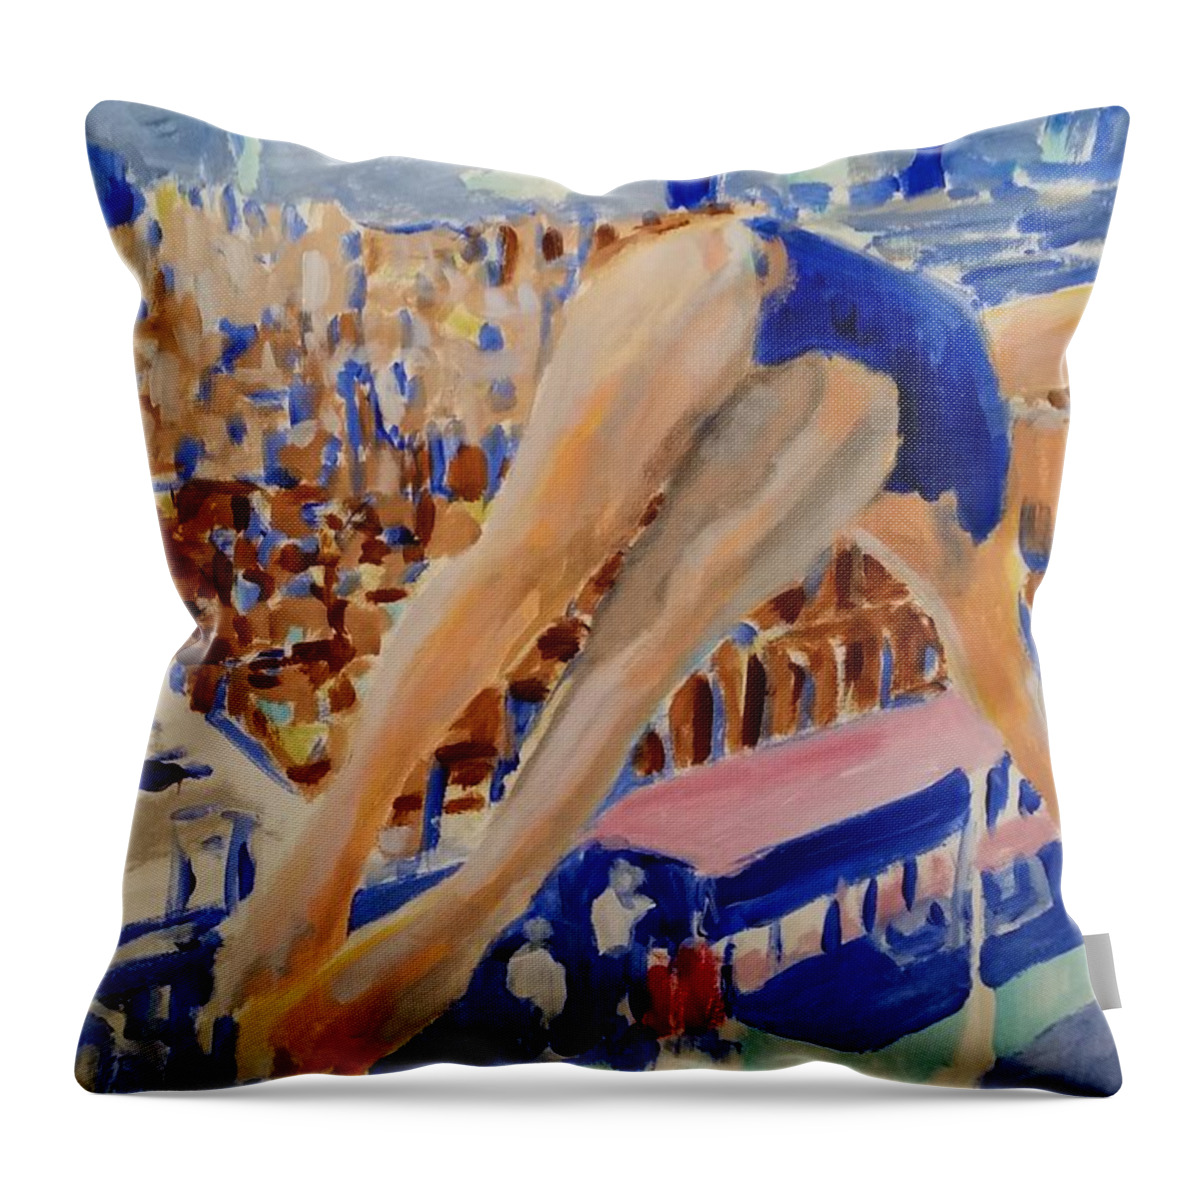 Platform Throw Pillow featuring the painting Diving V by Bachmors Artist